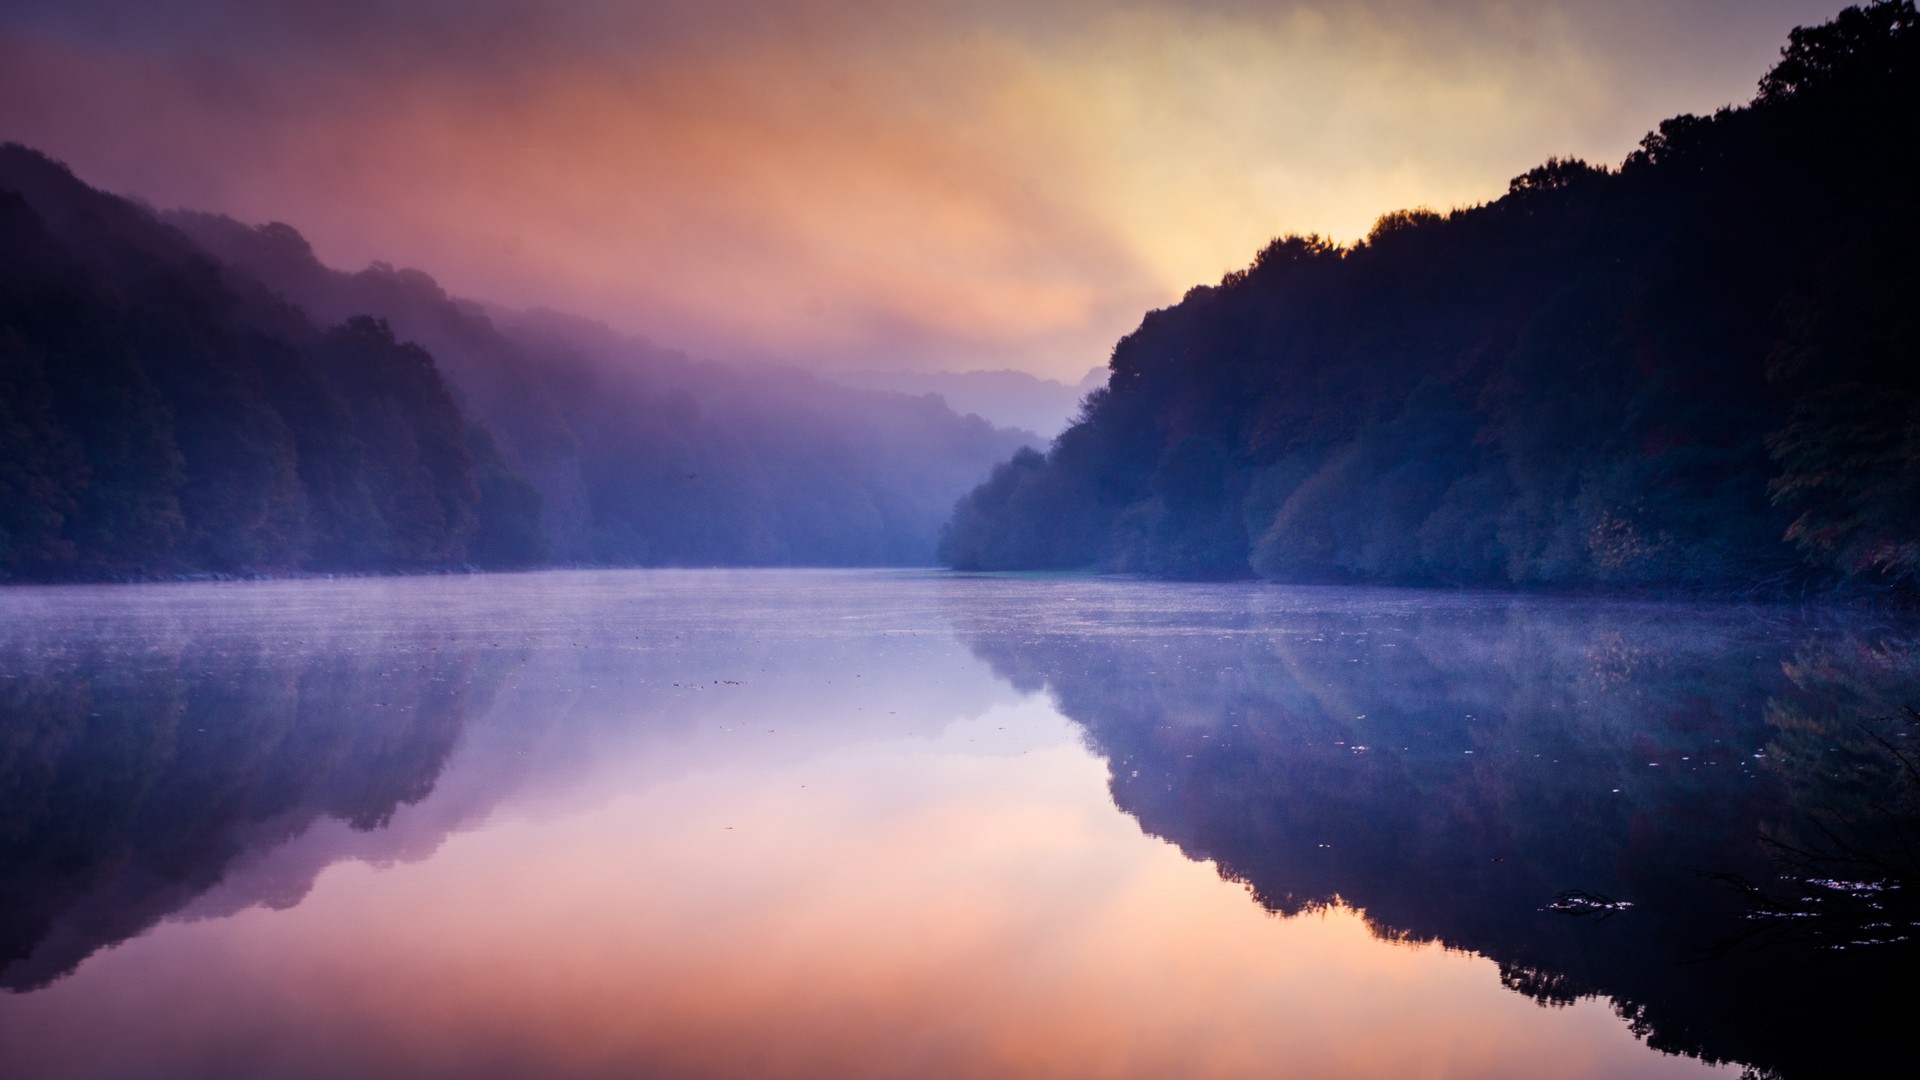 General 1920x1080 landscape nature mist lake reflection calm waters evening